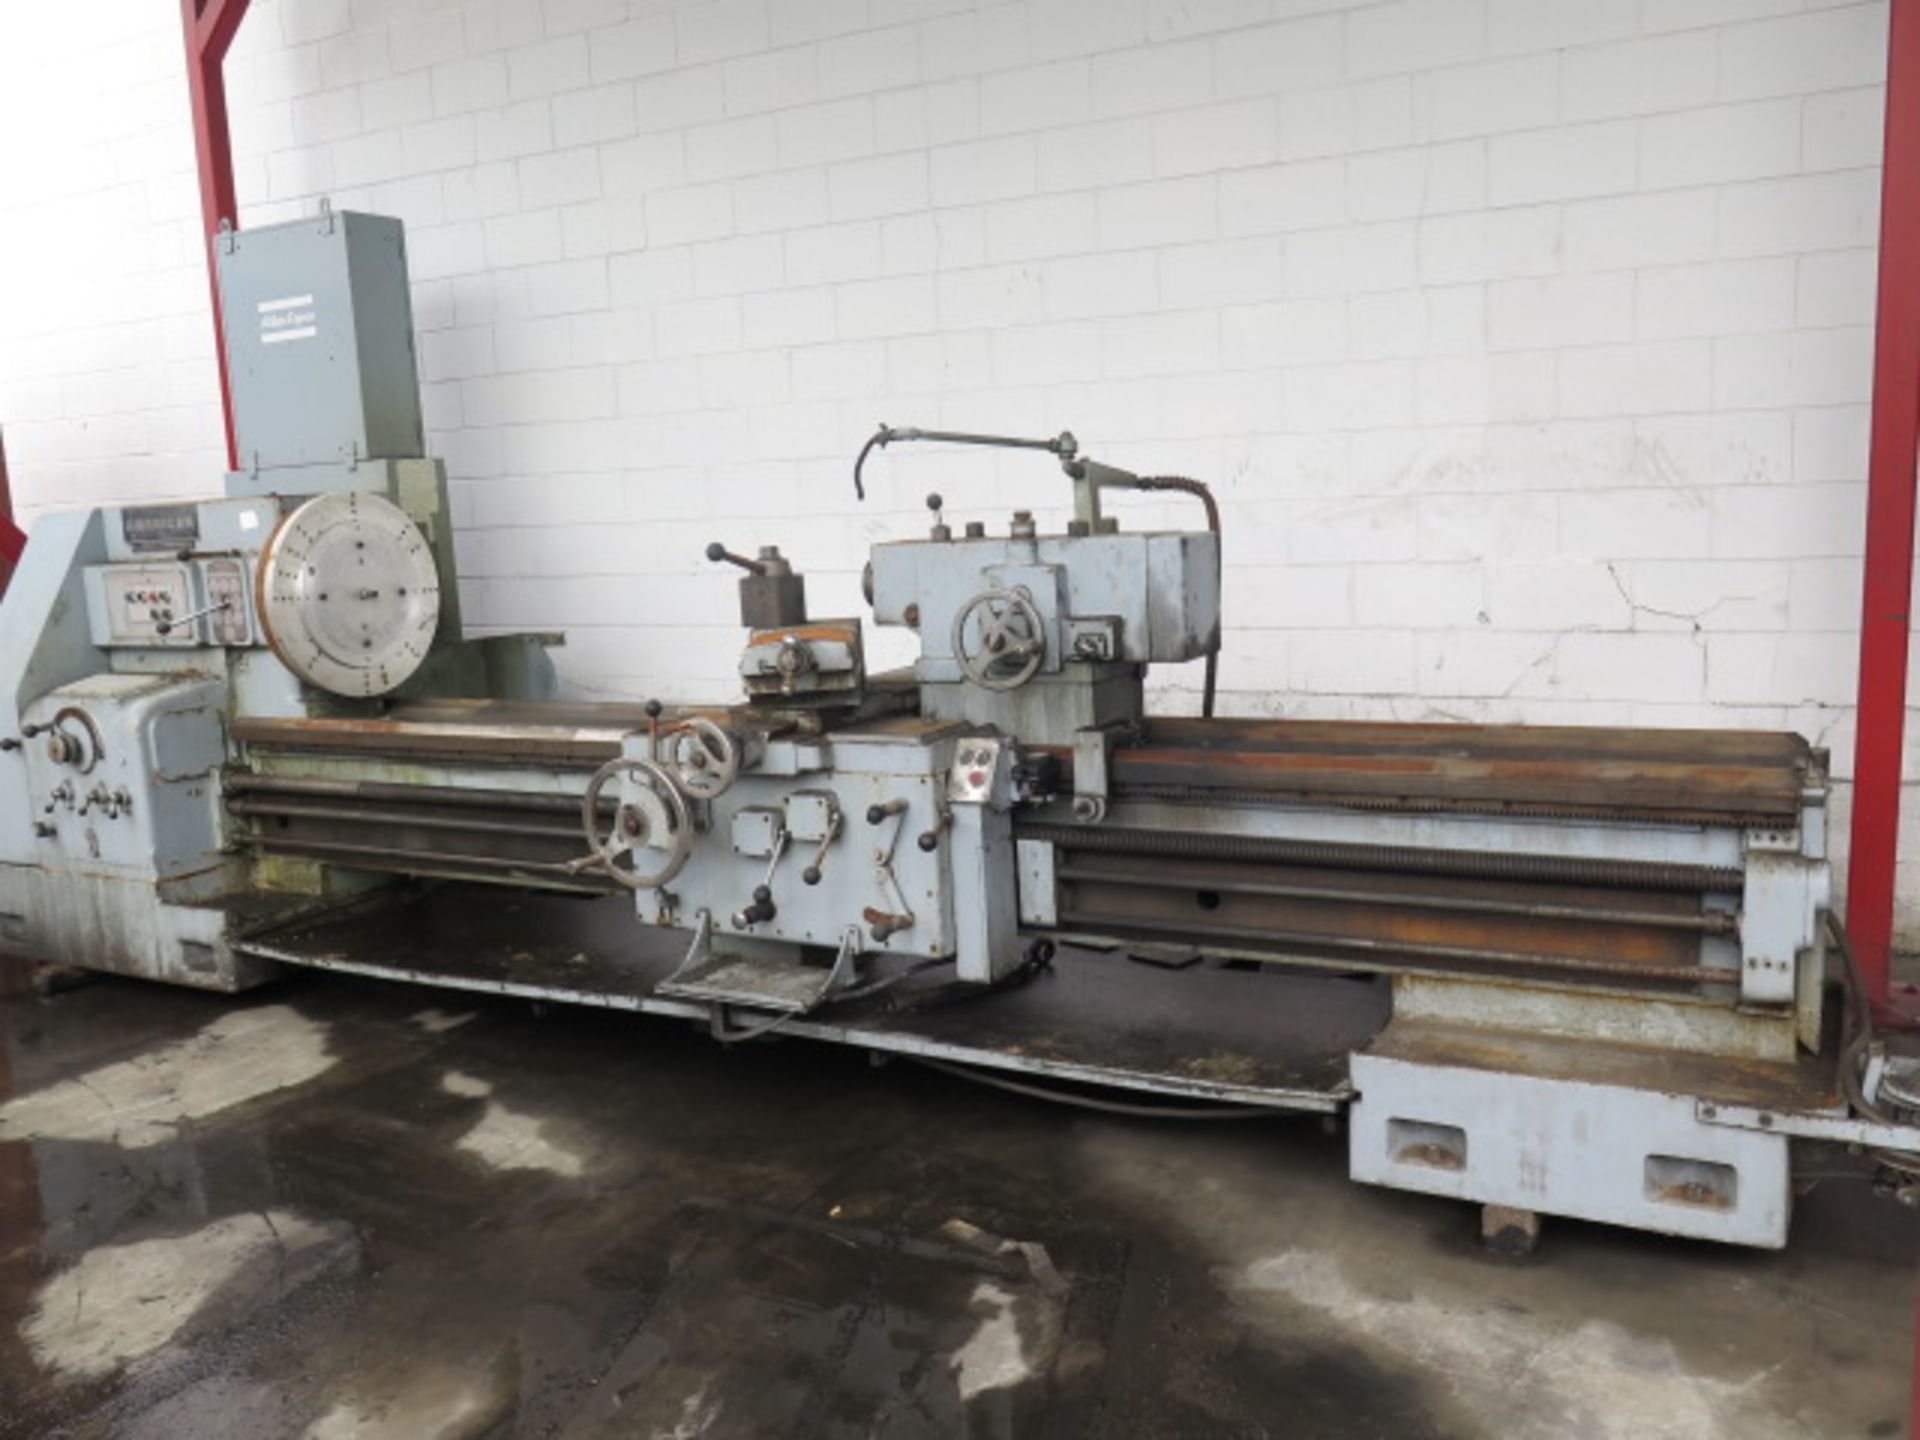 American 30" x 126" Geared Head Lathe s/n 78988 w/ 12-800 RPM, Inch Threading, Tailstock, Tool Post, - Image 2 of 10